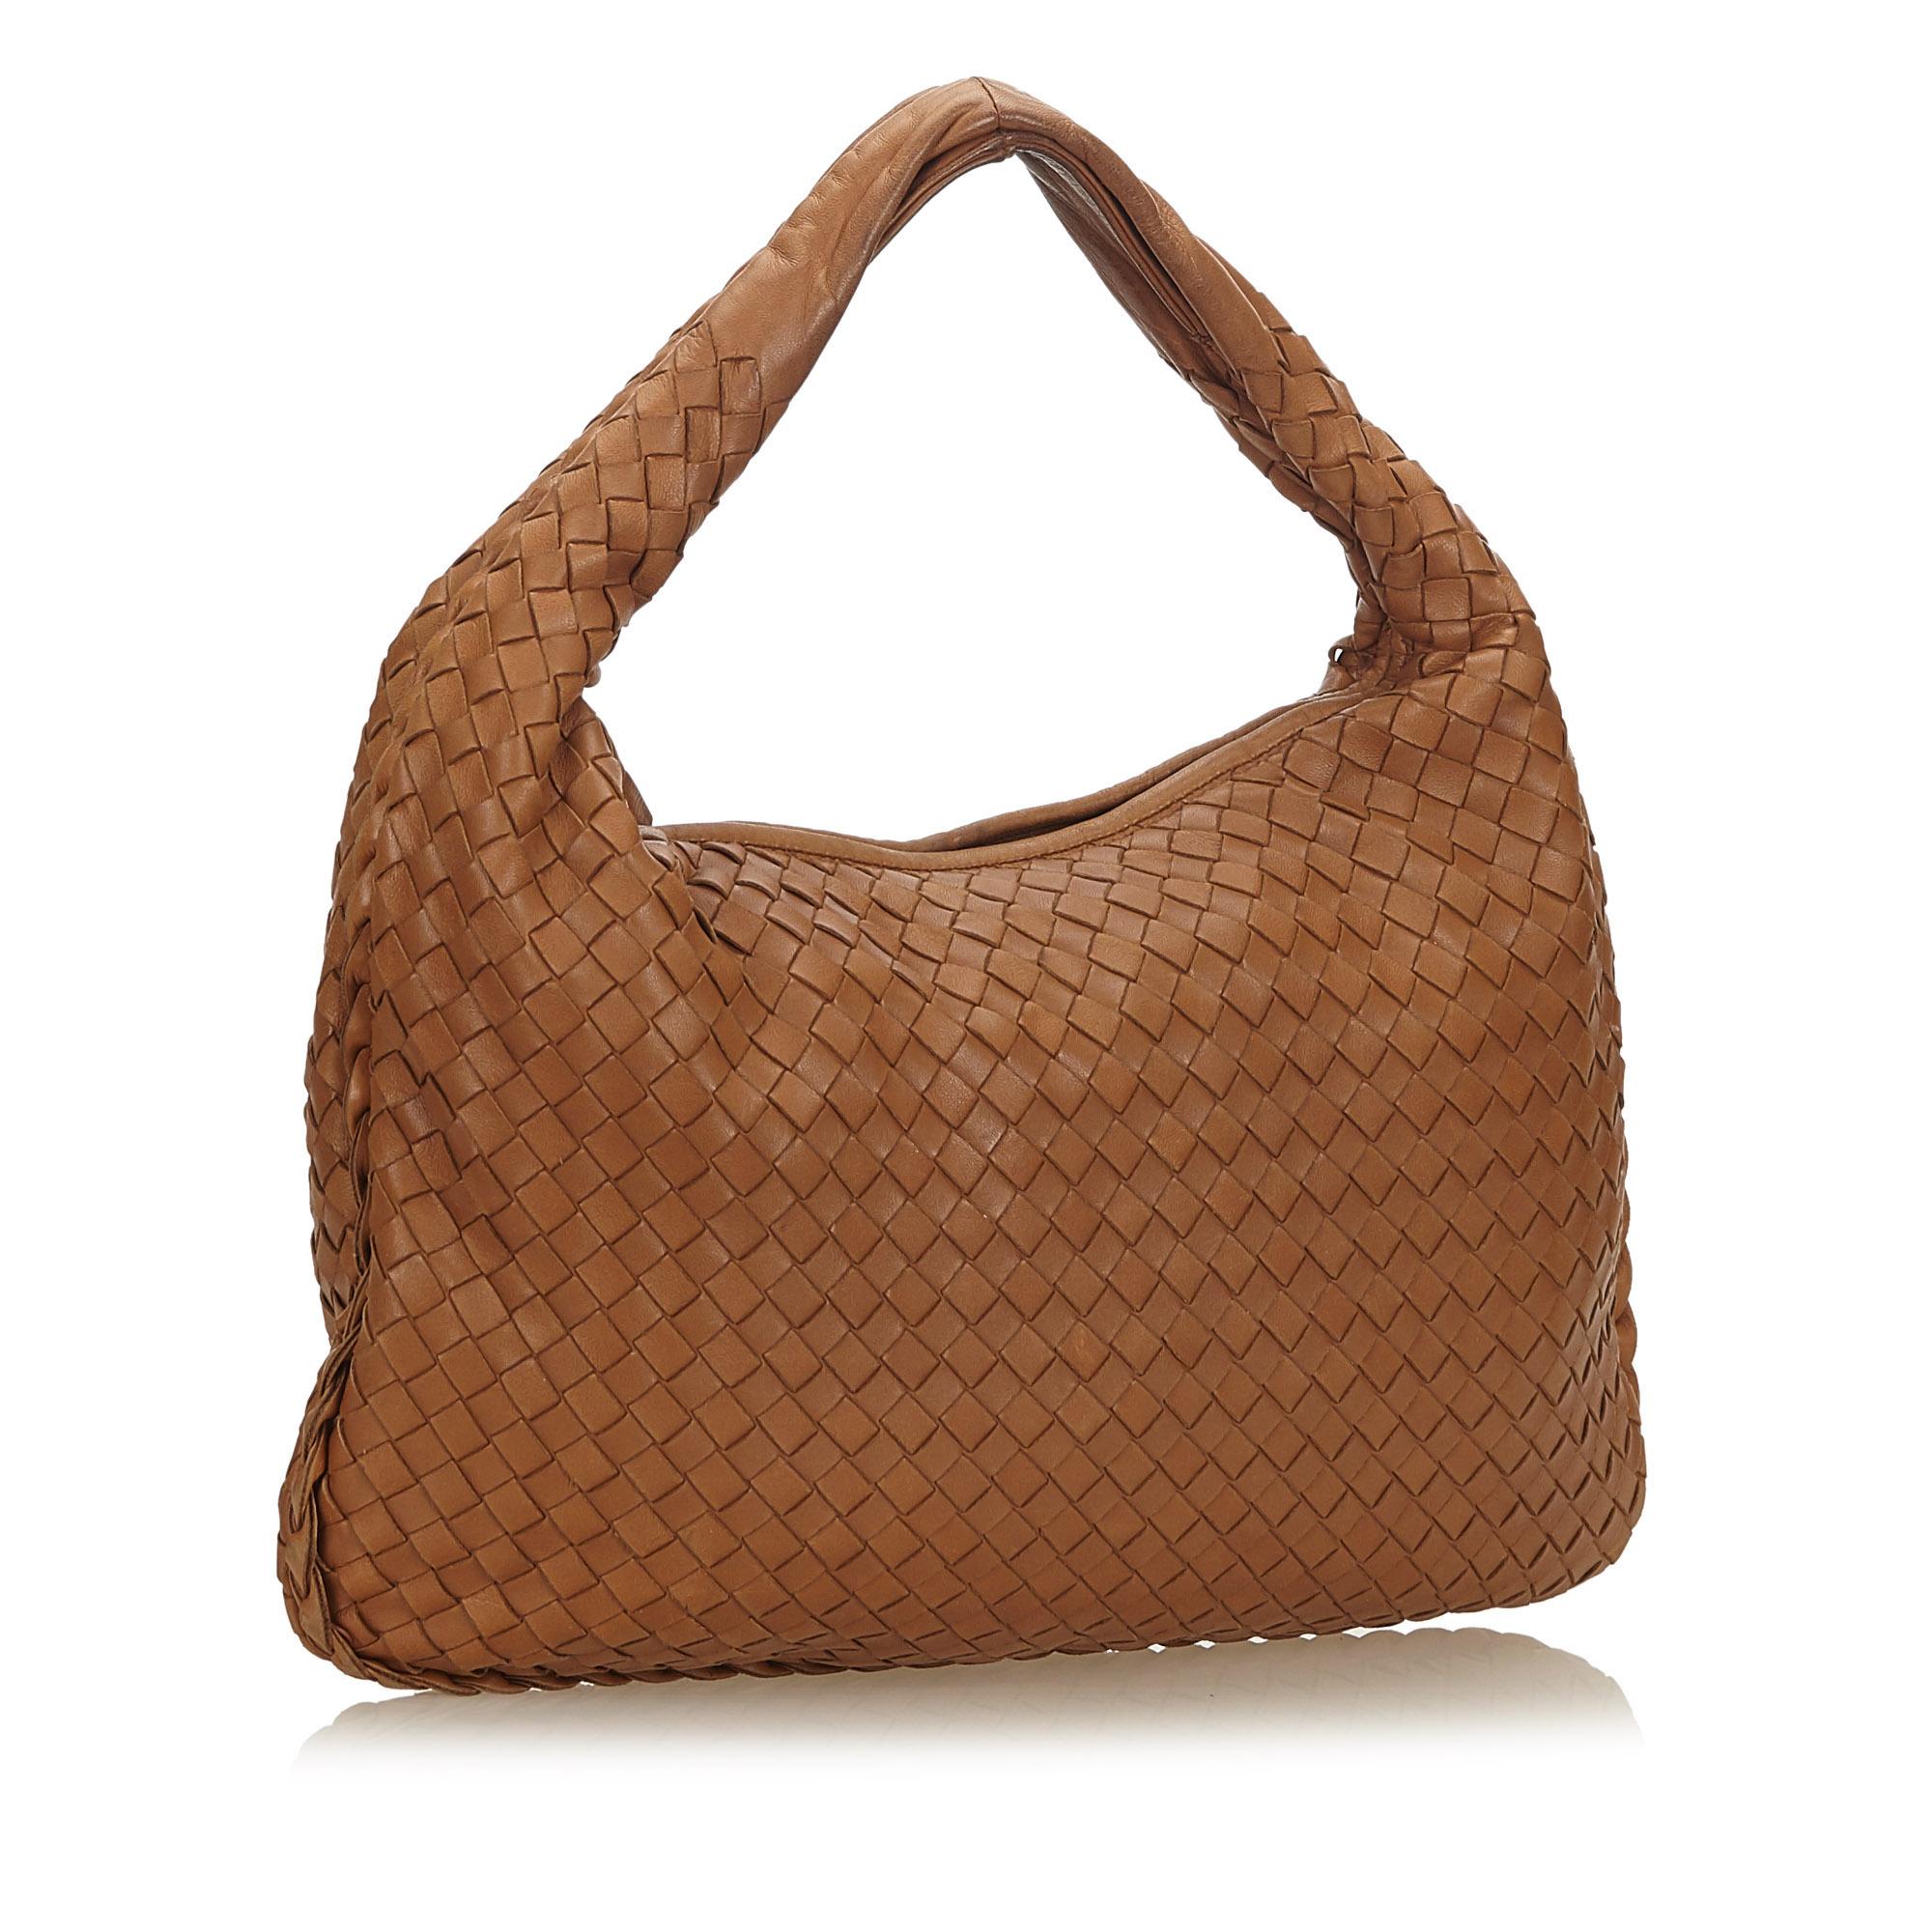 The Intrecciato Hobo features a woven leather body, flat strap, a top zip closure, and an interior zip pocket. It carries as B+ condition rating.

Inclusions: 
Dust Bag

Dimensions:
Length: 26.00 cm
Width: 38.00 cm
Depth: 2.00 cm
Shoulder Drop: 8.00